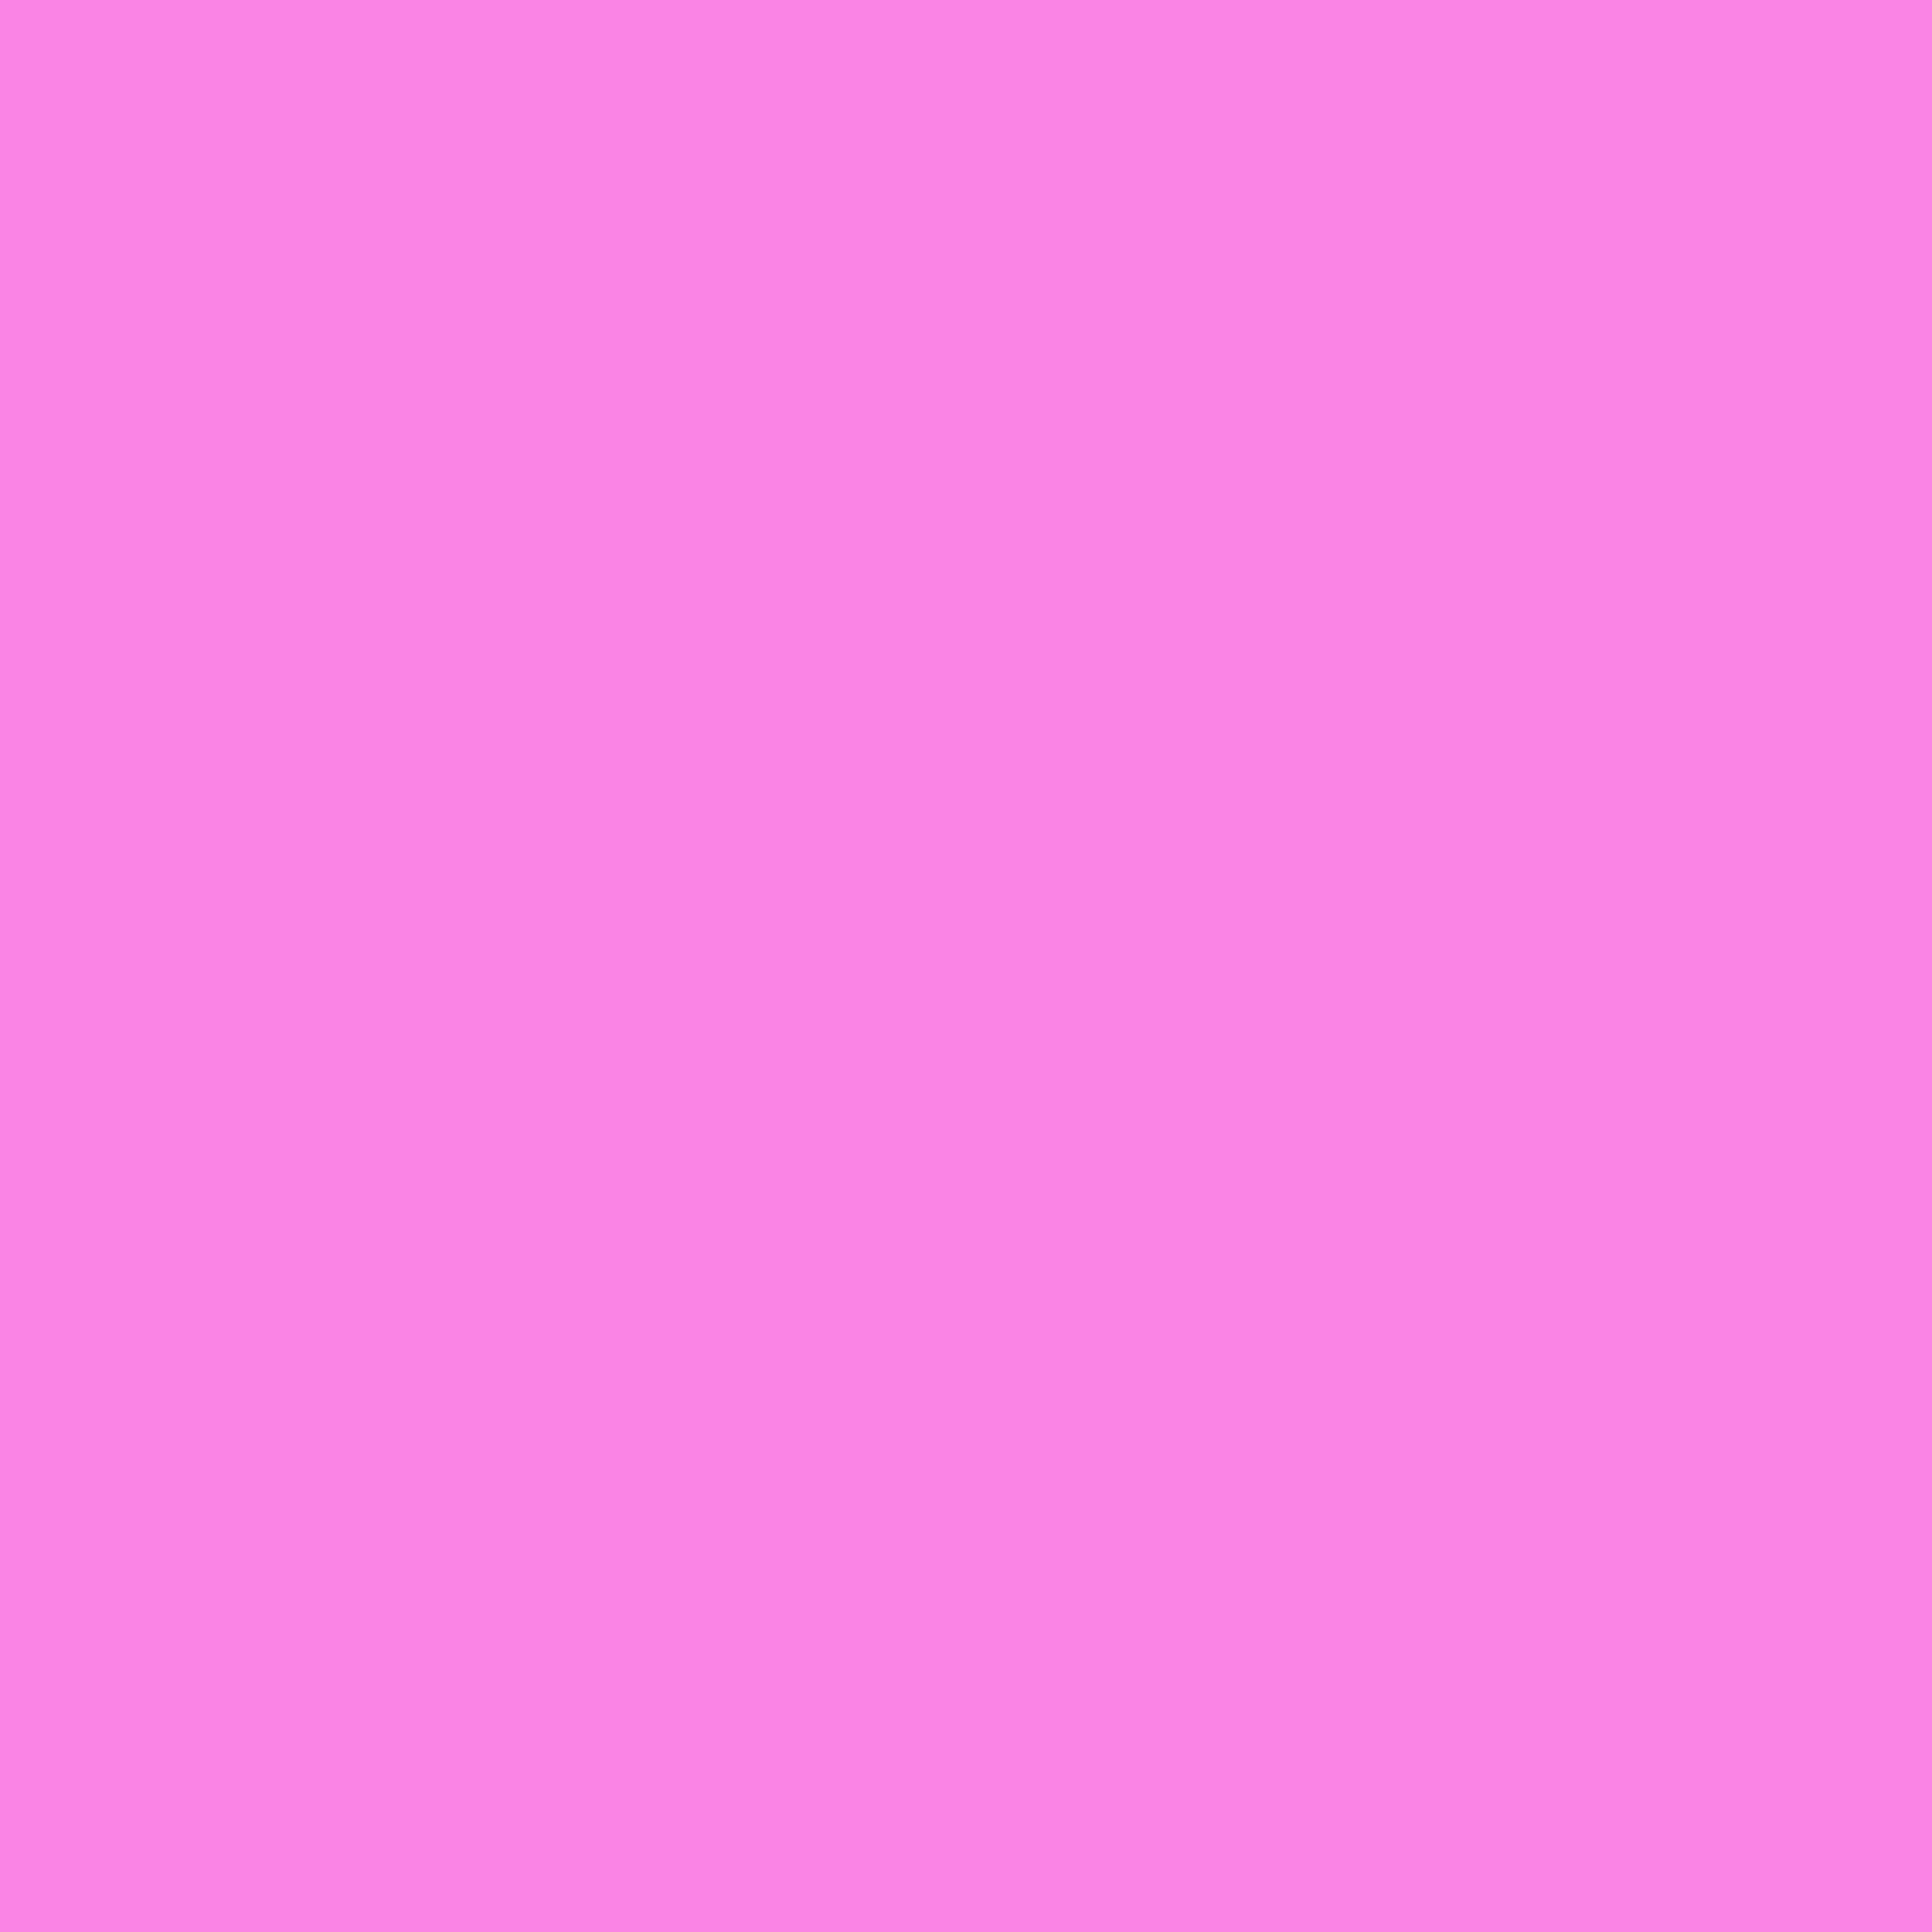 2732x2732 Pale Magenta Solid Color Background